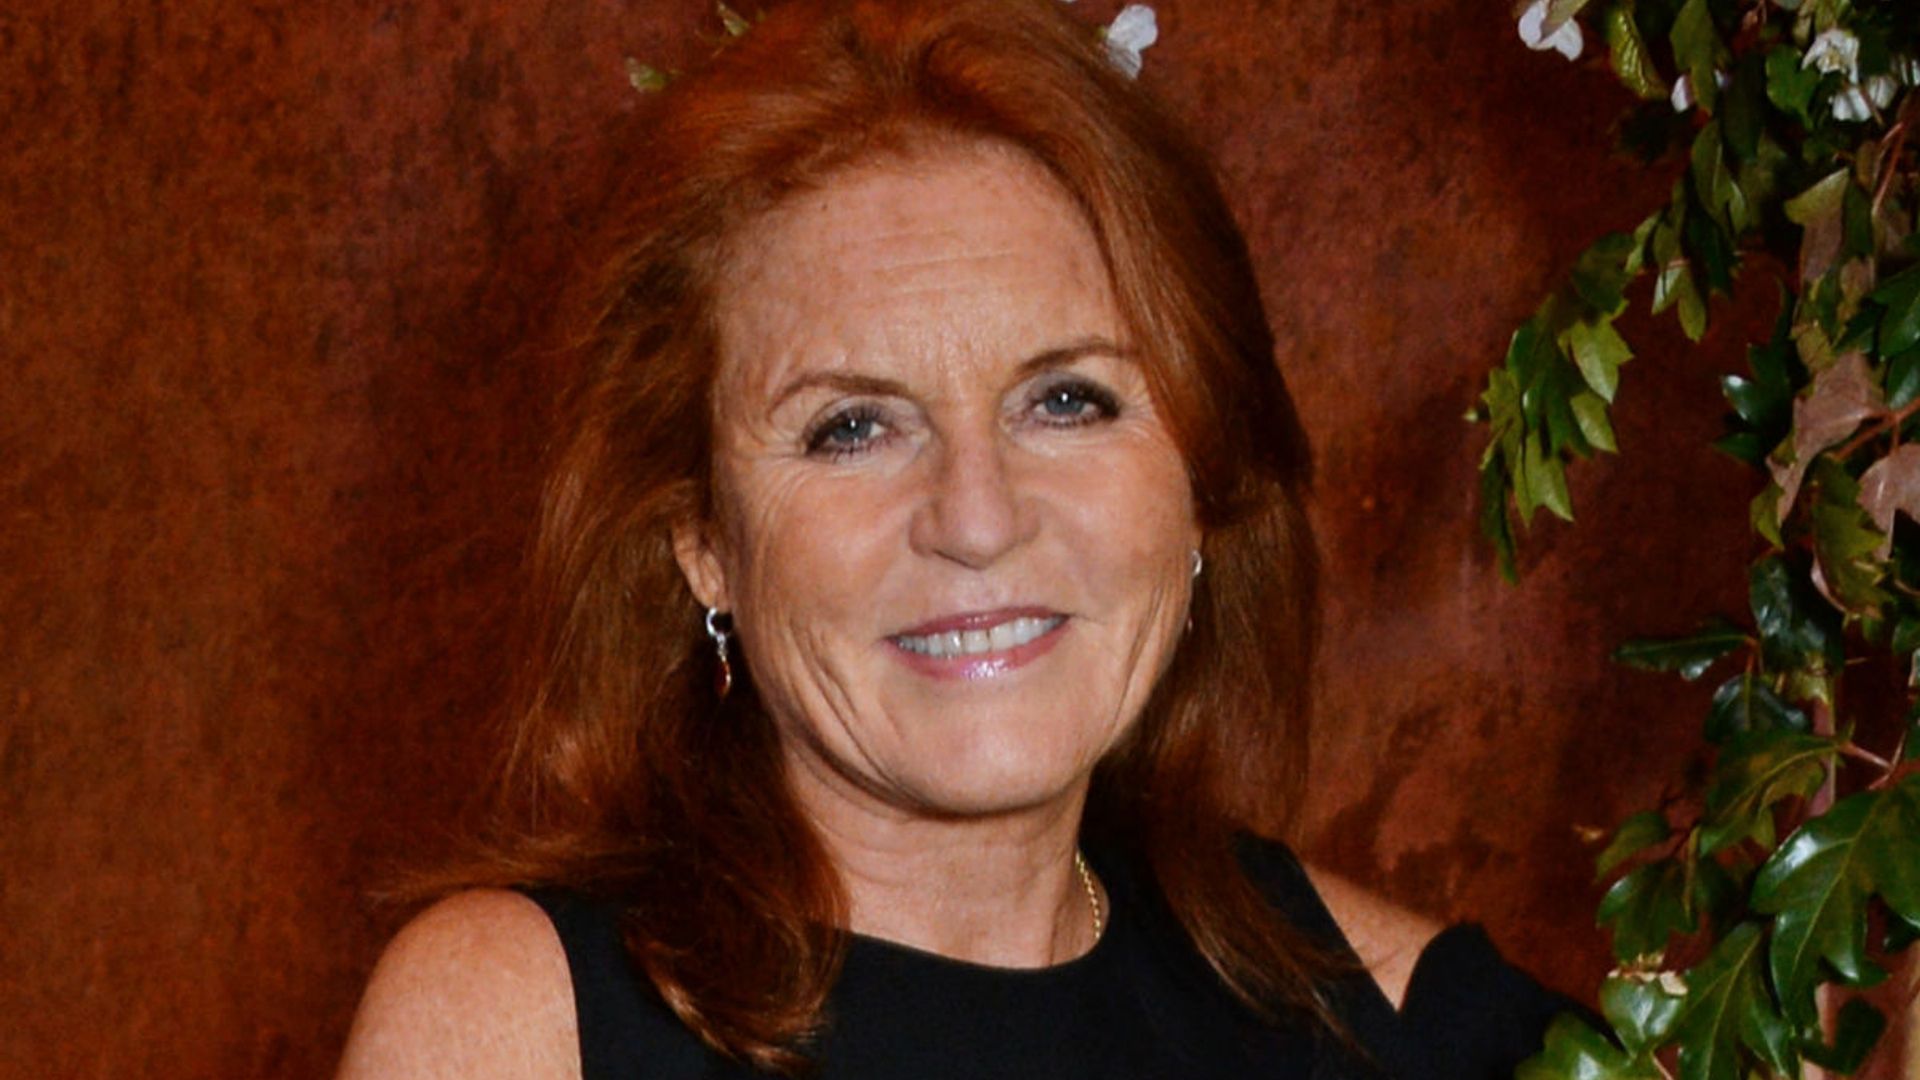 Sarah Ferguson, News about the former wife of Prince ...
